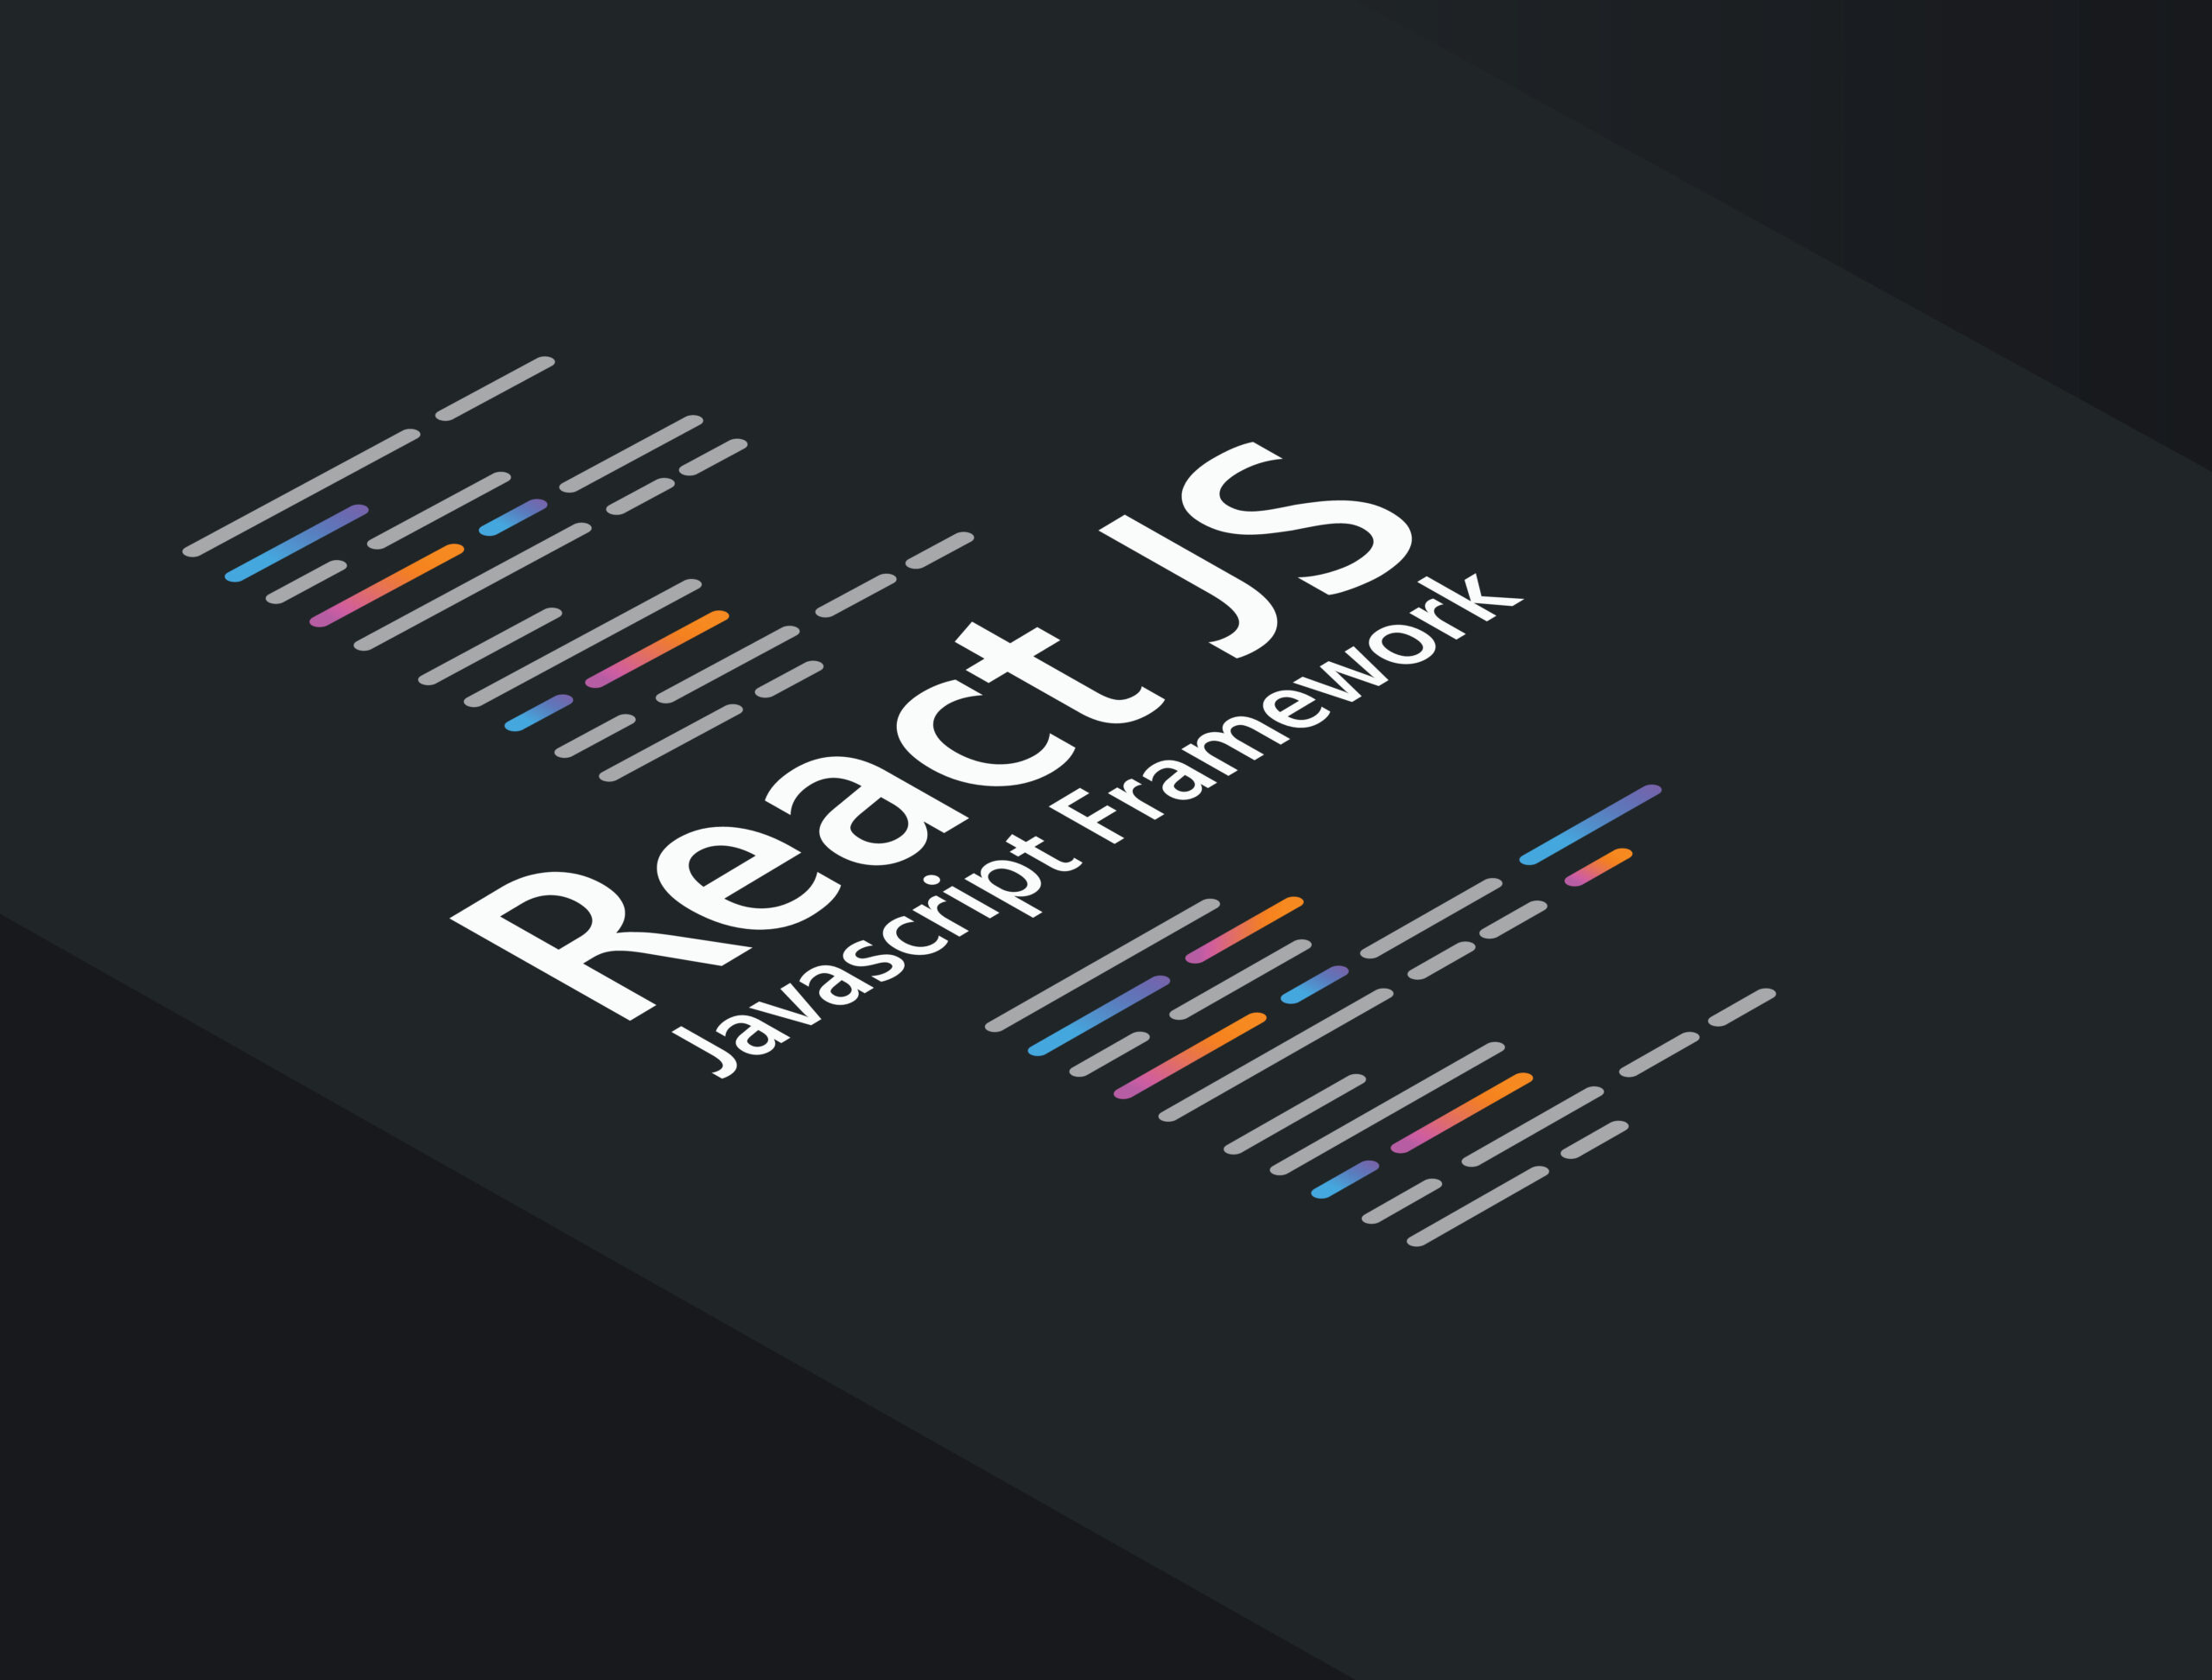 Why You Should Use React.js For Web Development